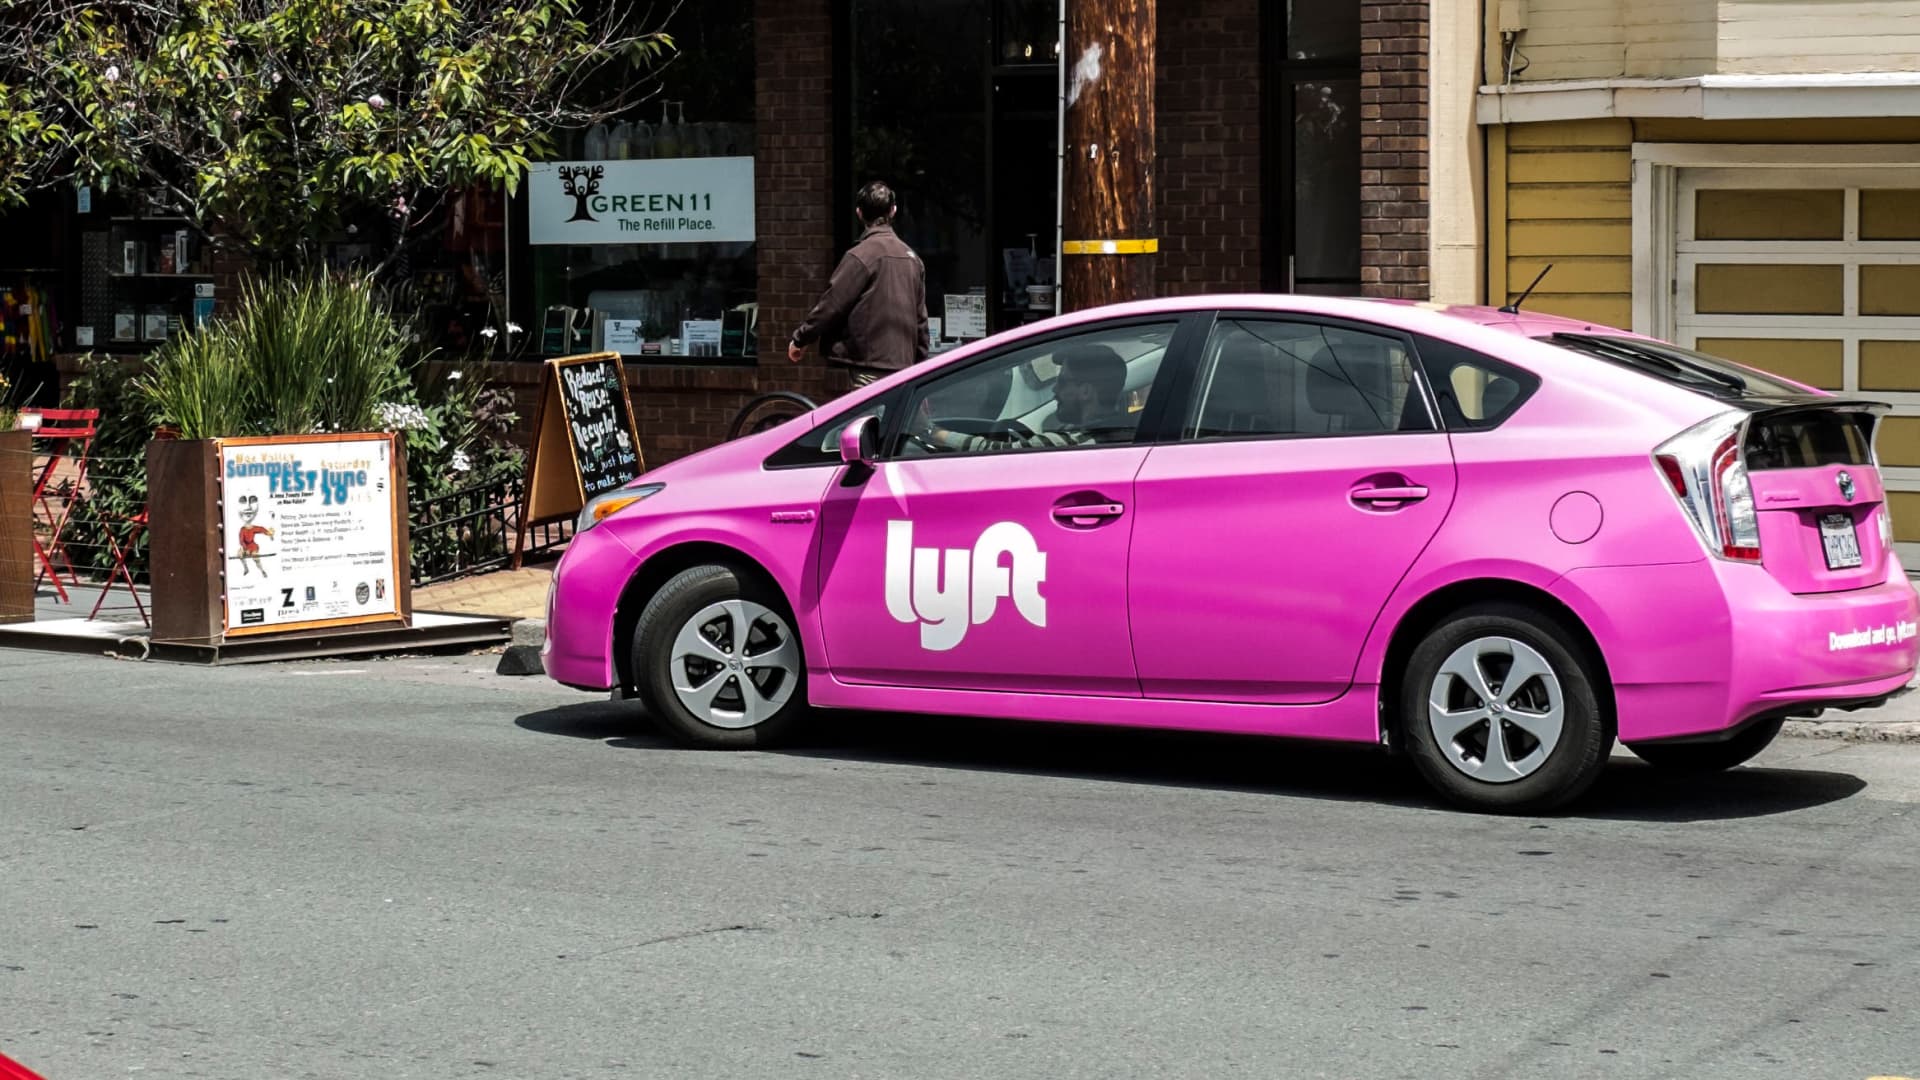 Stocks making the biggest moves midday: Lyft, Spotify, Expedia, Yelp and more